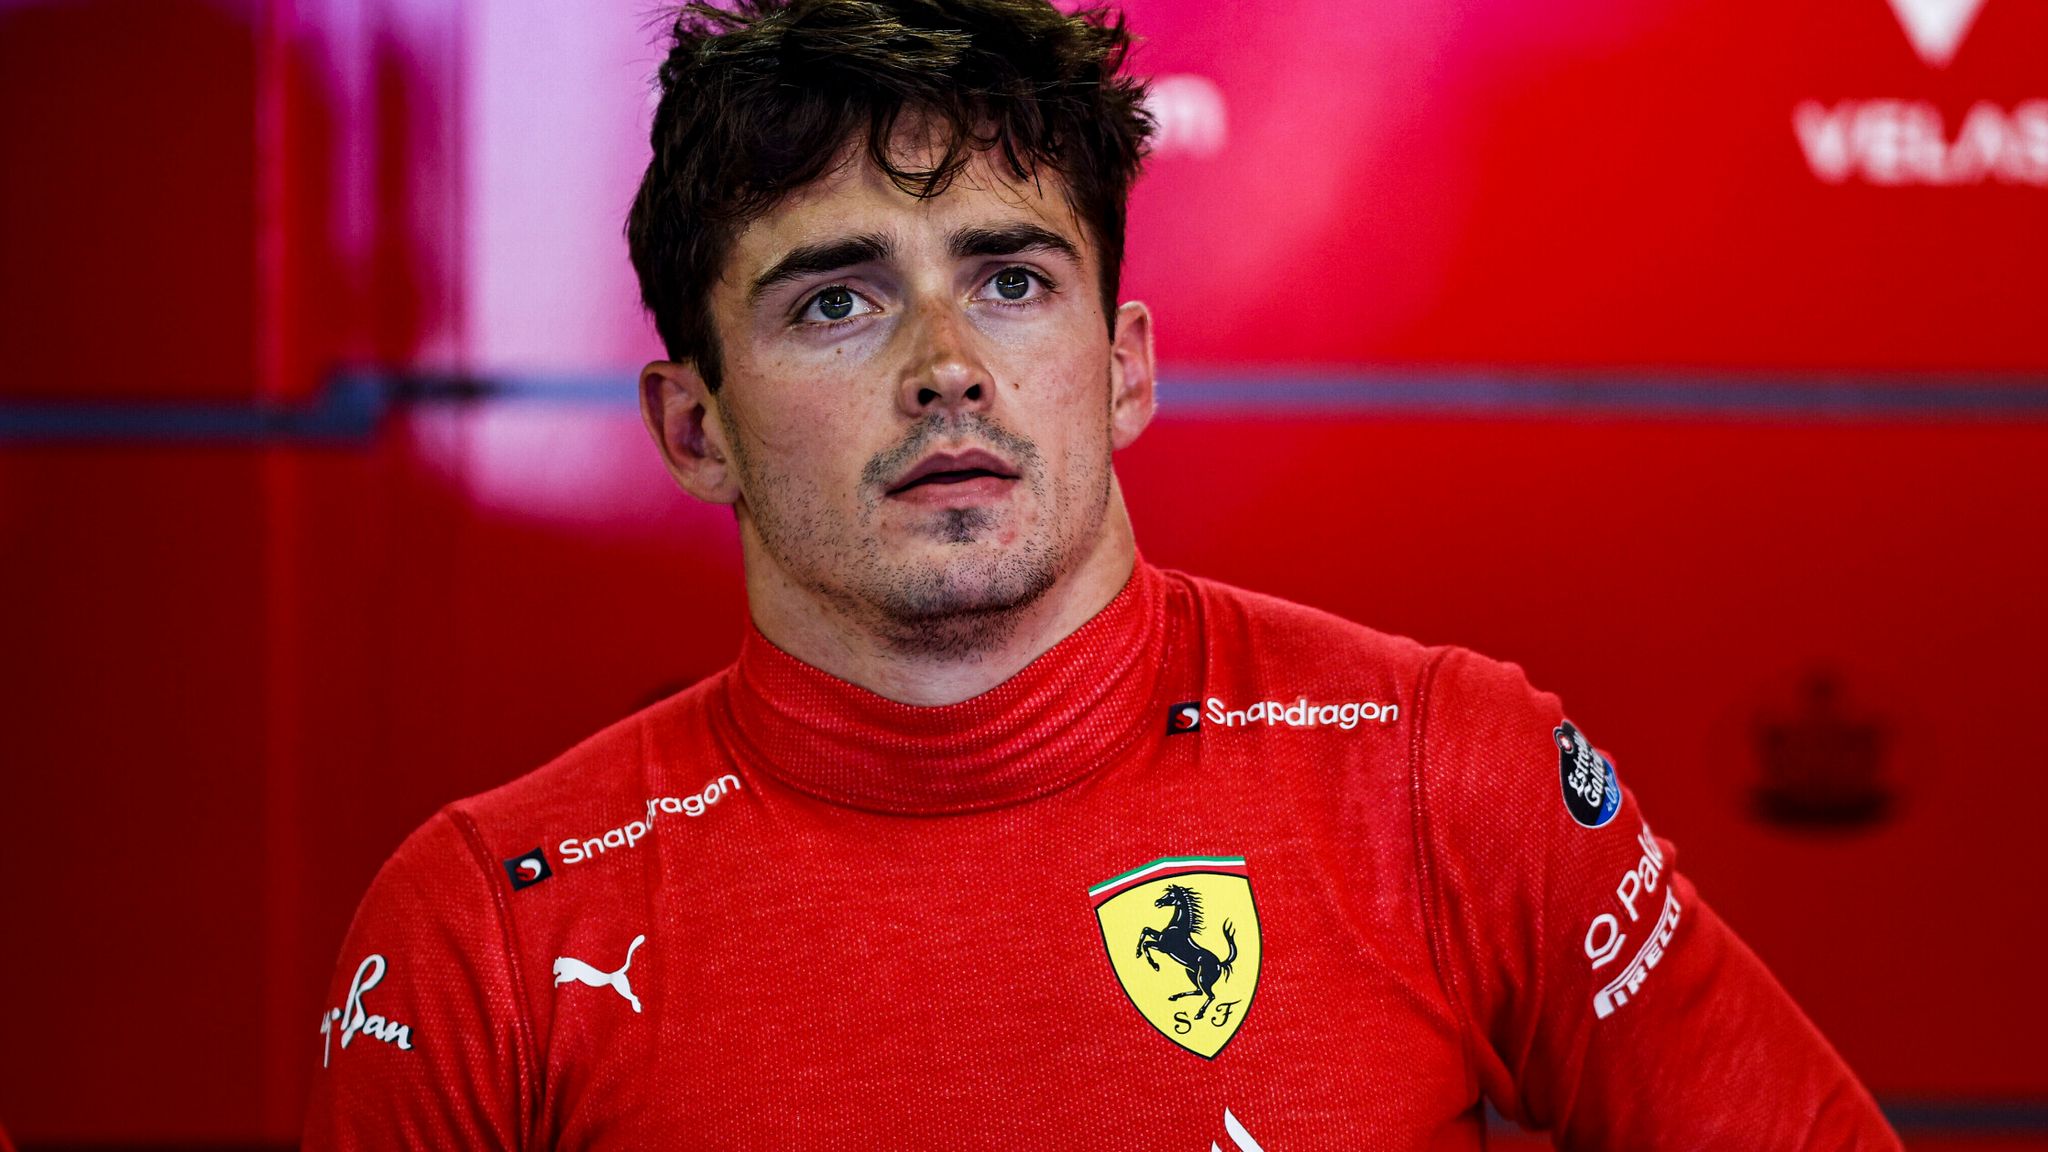 F1 Star Charles Leclerc Makes History With First Monaco Win  